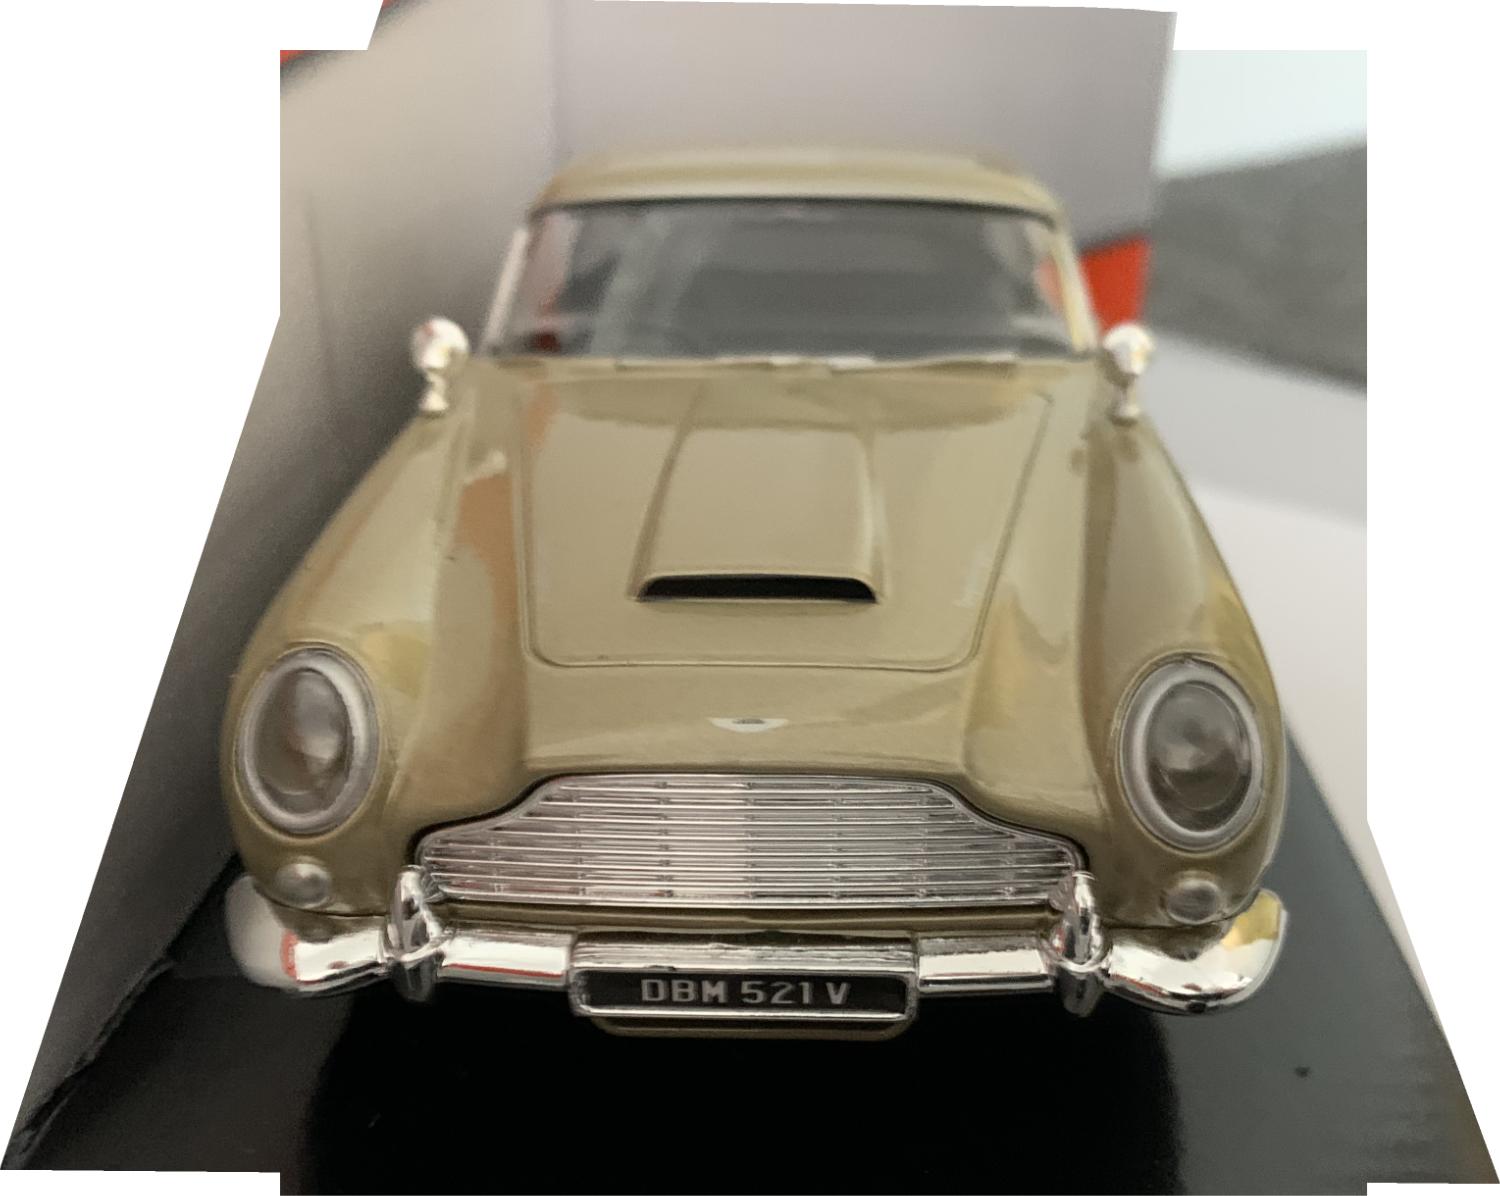 An excellent scale model of an Aston Martin DB5 decorated in gold with wired chrome wheels and body air vents.